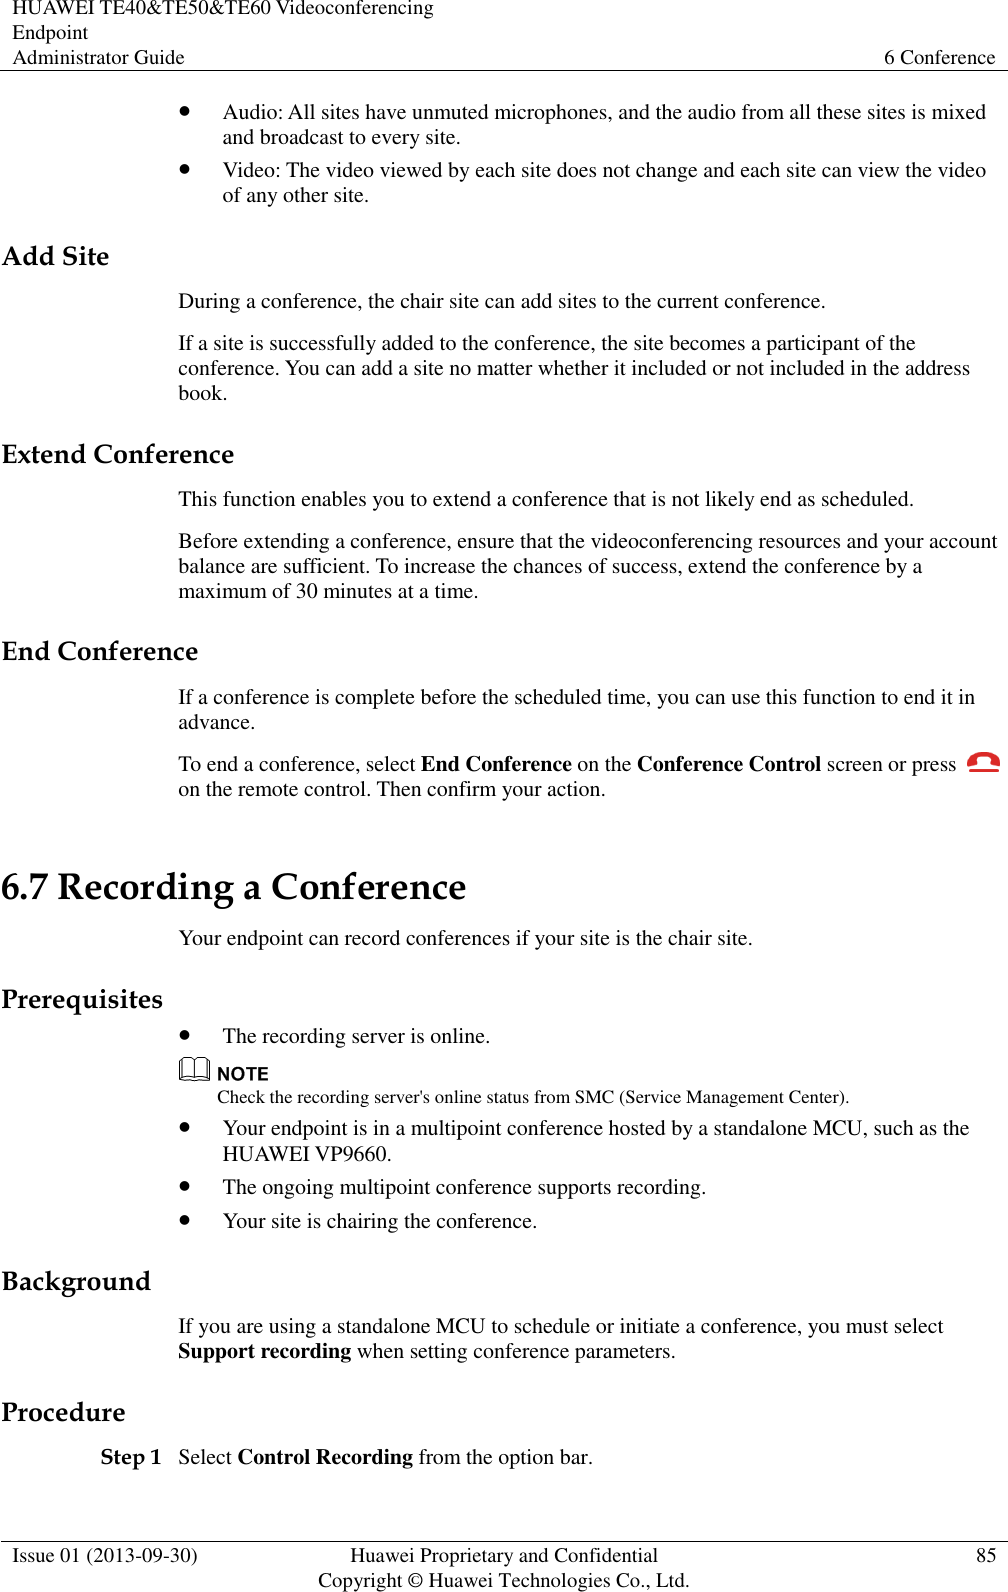 HUAWEI TE40&amp;TE50&amp;TE60 Videoconferencing Endpoint Administrator Guide 6 Conference  Issue 01 (2013-09-30) Huawei Proprietary and Confidential                                     Copyright © Huawei Technologies Co., Ltd. 85   Audio: All sites have unmuted microphones, and the audio from all these sites is mixed and broadcast to every site.  Video: The video viewed by each site does not change and each site can view the video of any other site.   Add Site During a conference, the chair site can add sites to the current conference. If a site is successfully added to the conference, the site becomes a participant of the conference. You can add a site no matter whether it included or not included in the address book. Extend Conference This function enables you to extend a conference that is not likely end as scheduled. Before extending a conference, ensure that the videoconferencing resources and your account balance are sufficient. To increase the chances of success, extend the conference by a maximum of 30 minutes at a time. End Conference If a conference is complete before the scheduled time, you can use this function to end it in advance. To end a conference, select End Conference on the Conference Control screen or press   on the remote control. Then confirm your action. 6.7 Recording a Conference Your endpoint can record conferences if your site is the chair site. Prerequisites  The recording server is online.  Check the recording server&apos;s online status from SMC (Service Management Center).  Your endpoint is in a multipoint conference hosted by a standalone MCU, such as the HUAWEI VP9660.  The ongoing multipoint conference supports recording.  Your site is chairing the conference. Background If you are using a standalone MCU to schedule or initiate a conference, you must select Support recording when setting conference parameters.   Procedure Step 1 Select Control Recording from the option bar. 